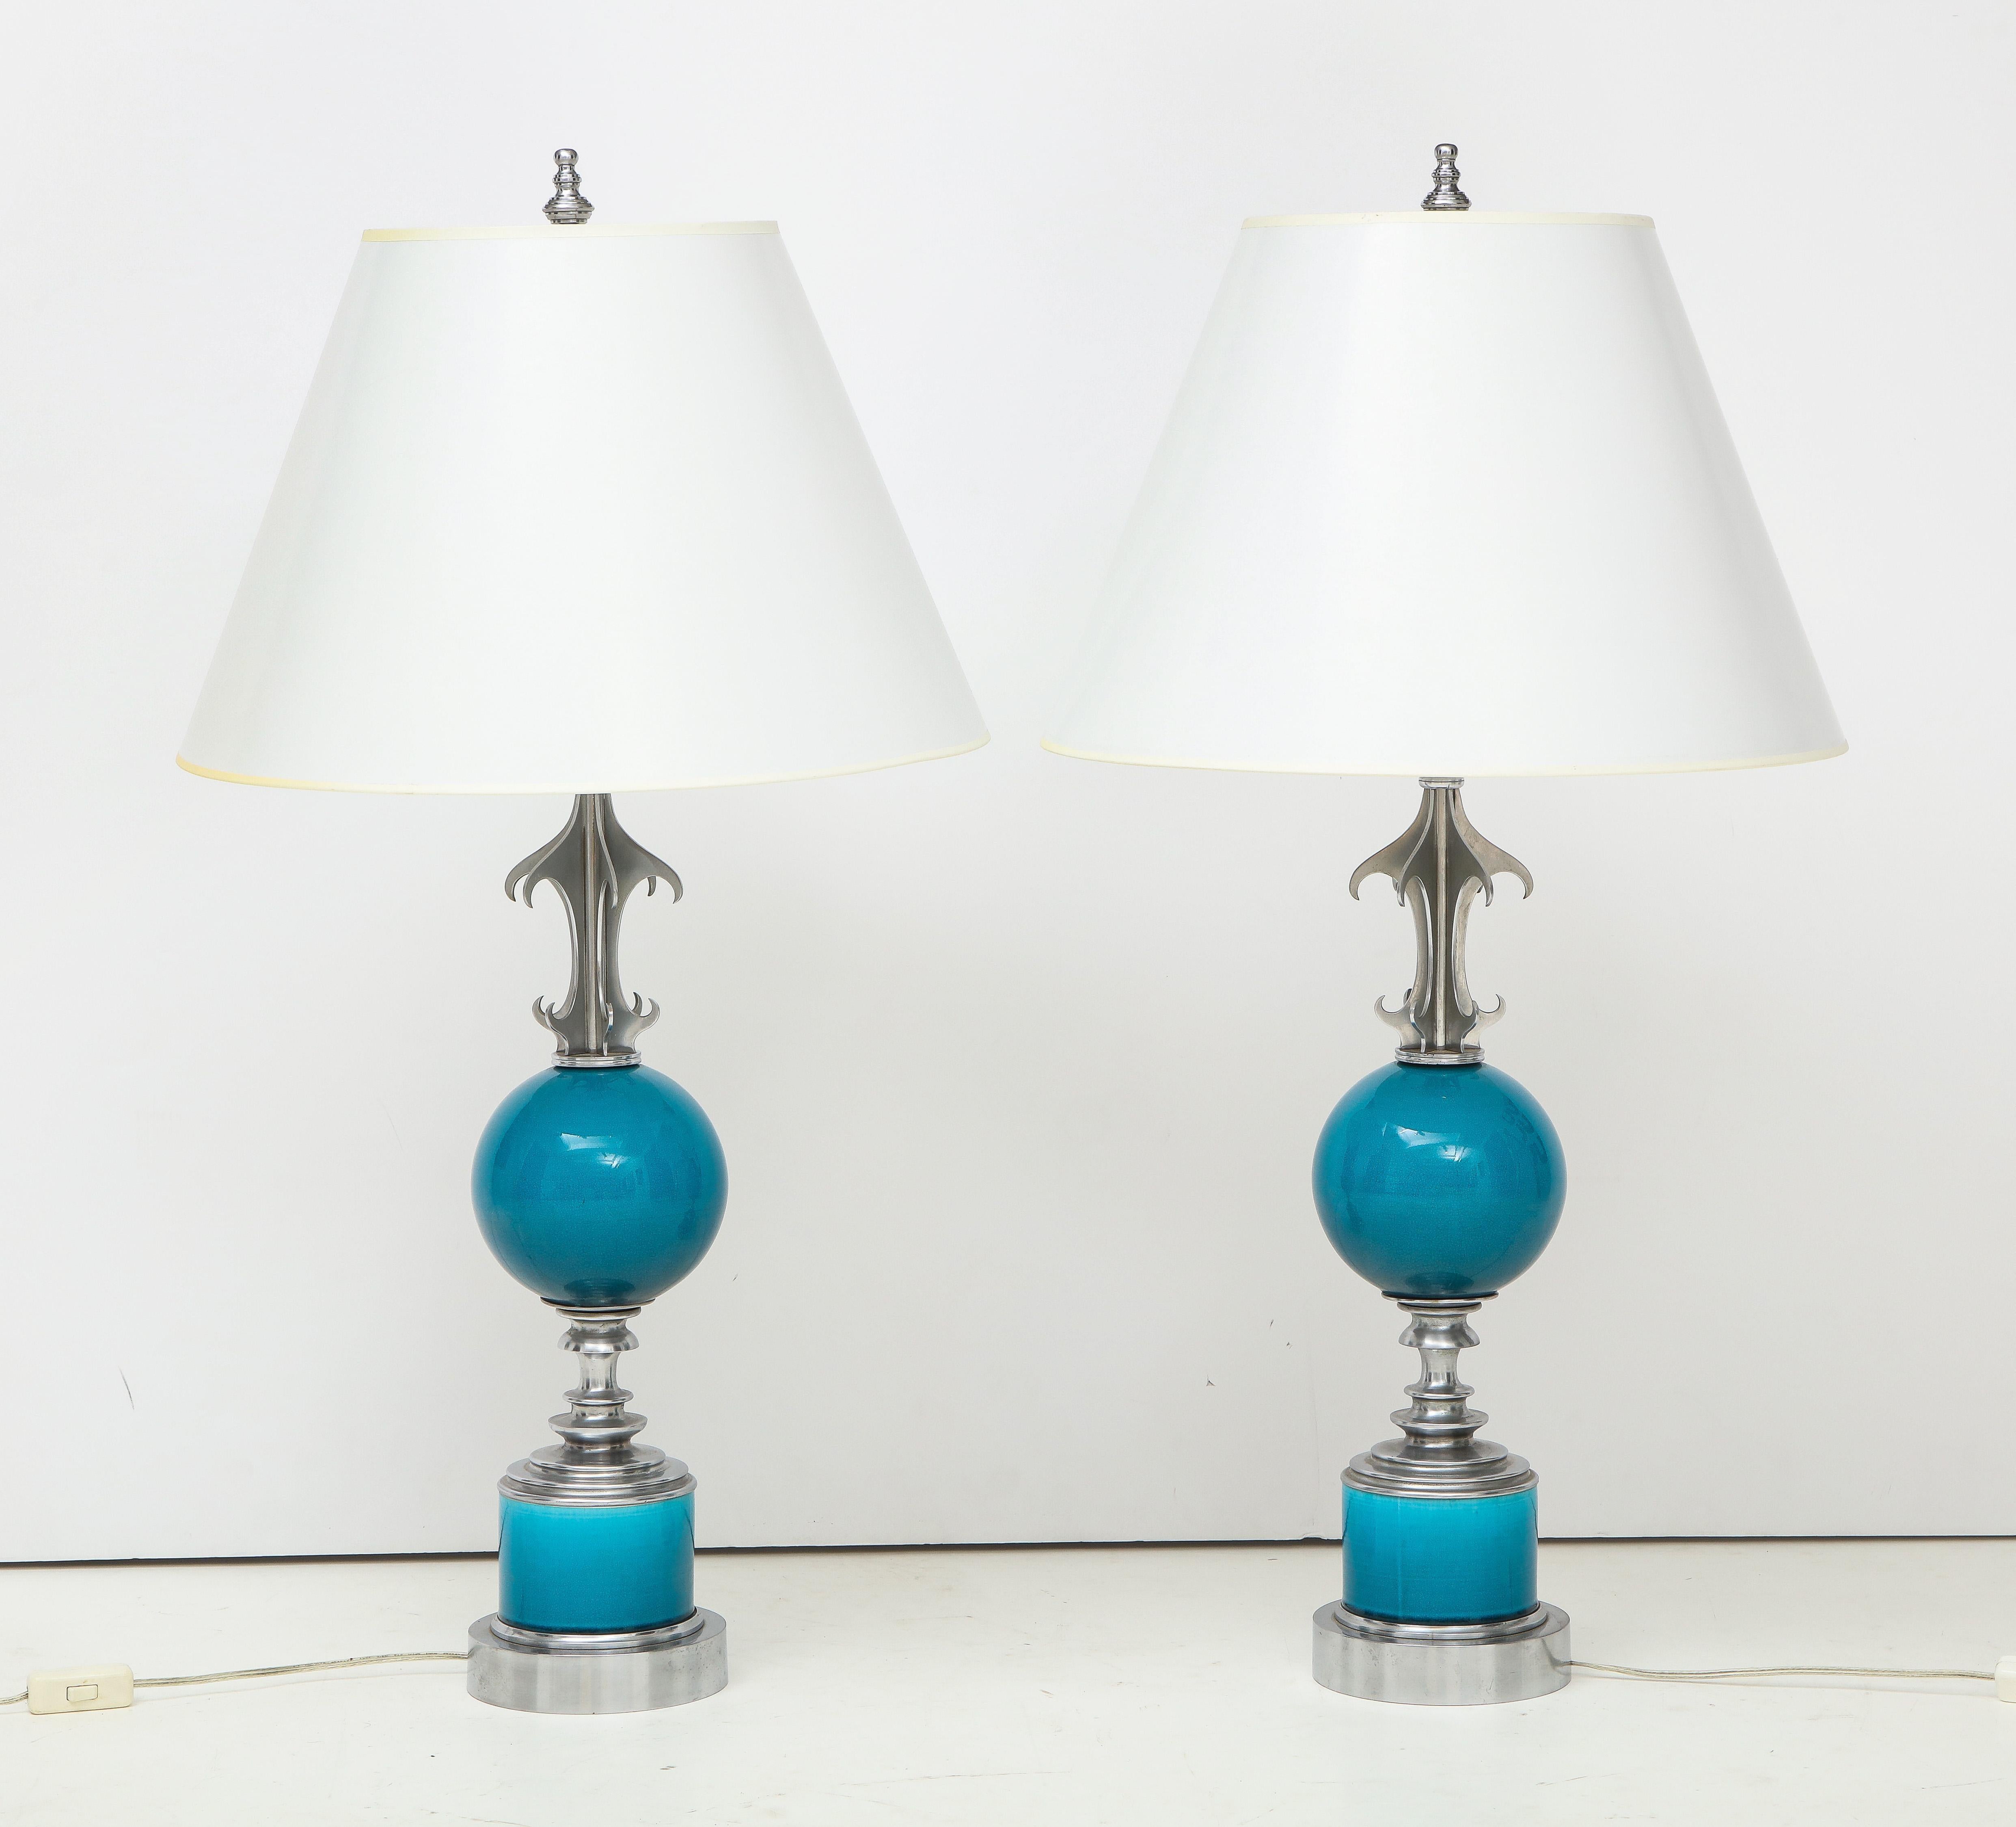 Unique nickel-plated lamps with, blue ceramic globes and detailed bases.